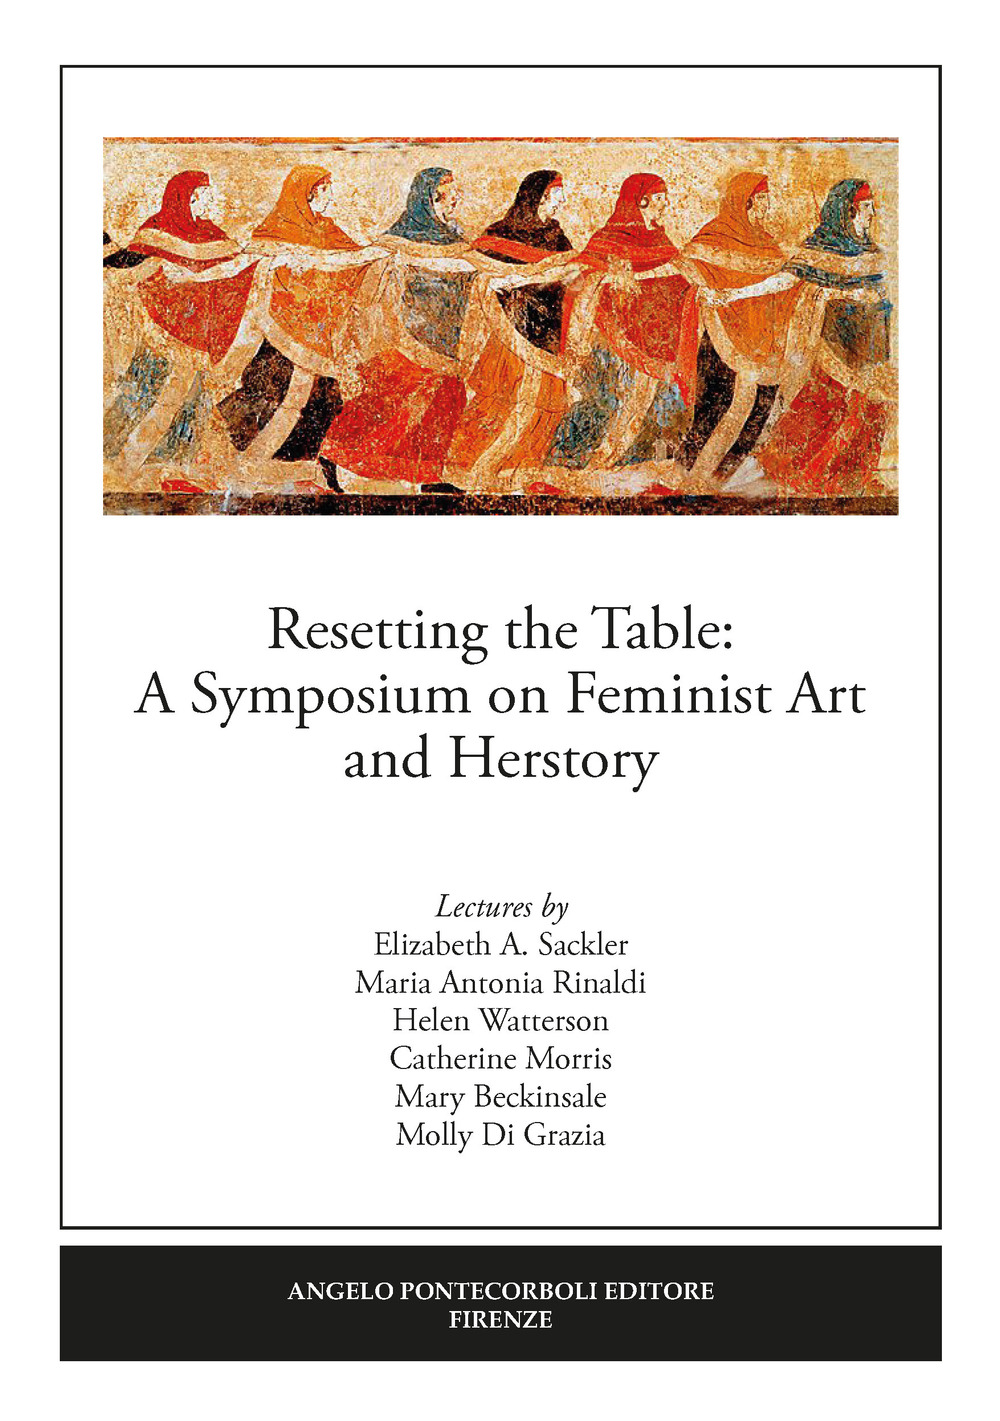 Resetting the table: a symposium on feminist art and herstory